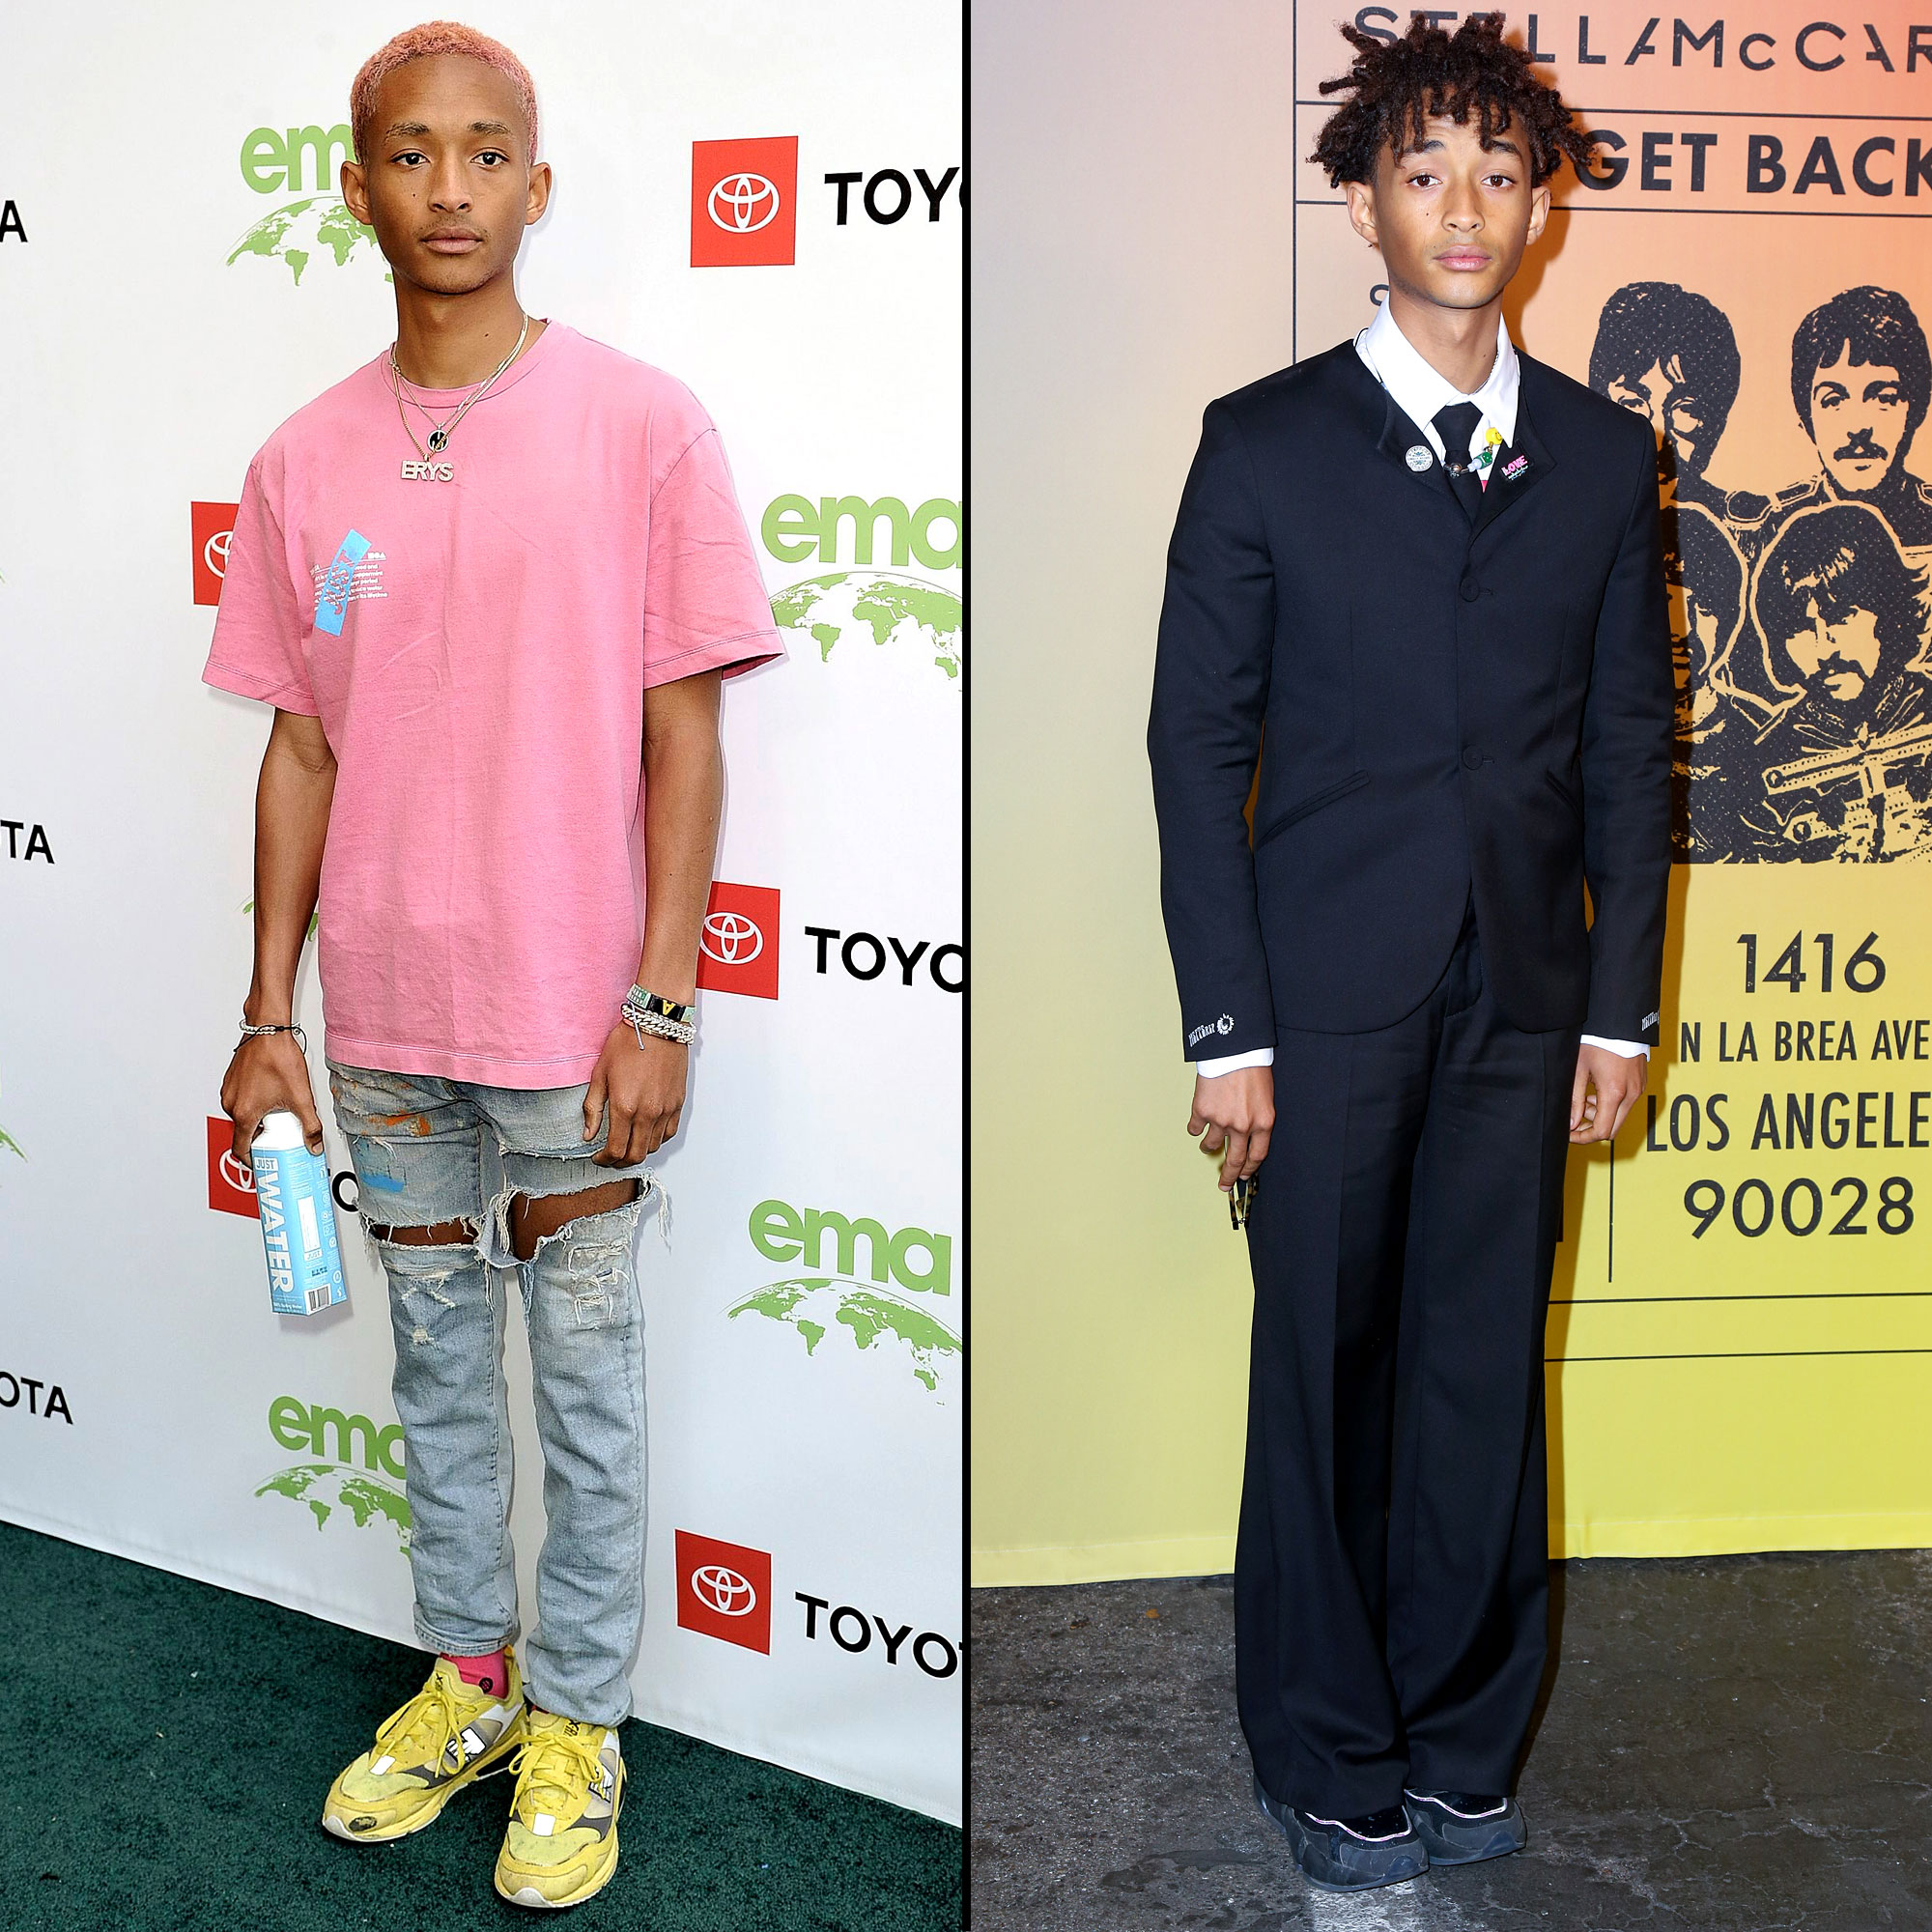 Jaden Smith: I've Gained 10 Lbs Since Family Intervention